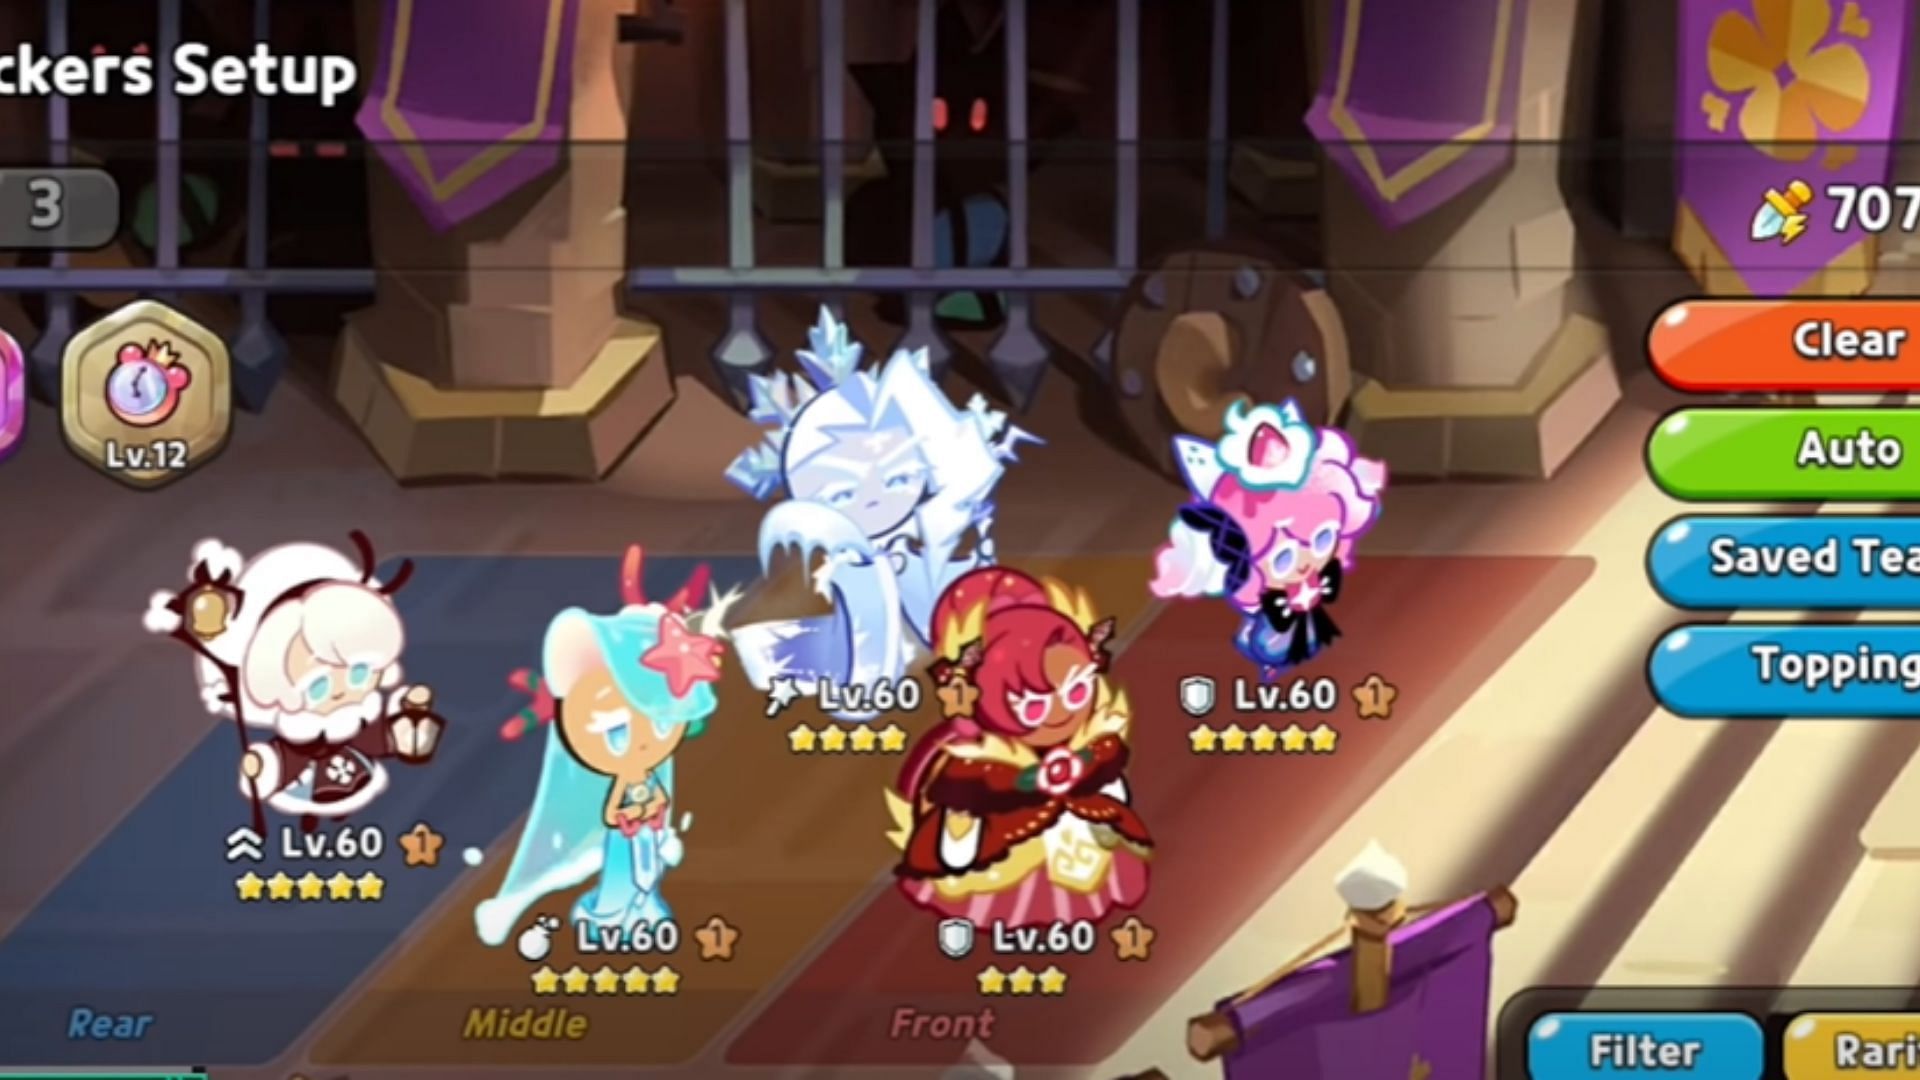 What Cookie Run Kingdom team composition is best to complete the story